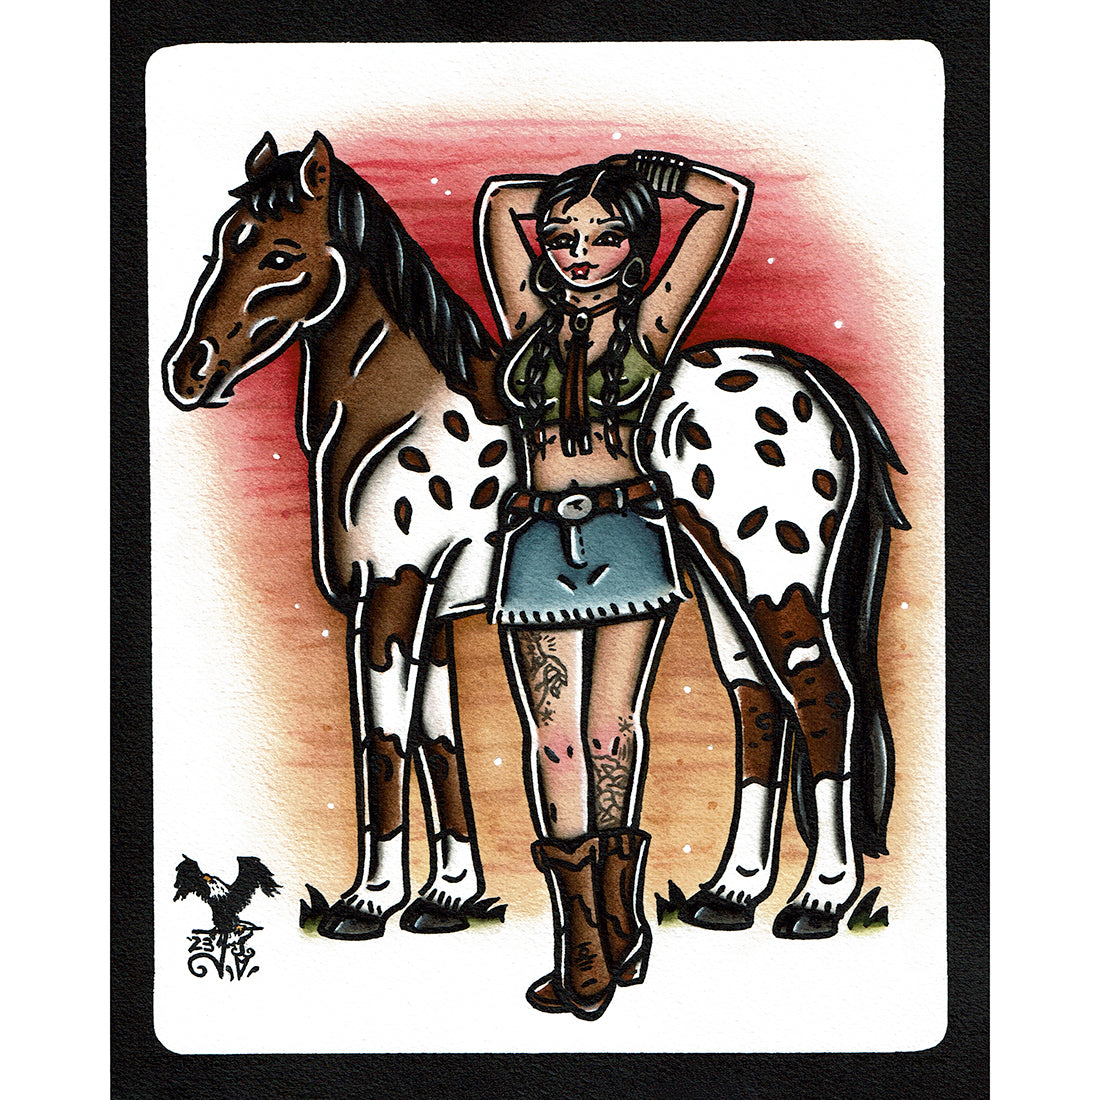 American traditional tattoo flash illustration Nez Perce Tribe Appaloosa Horse Pinup watercolor painting.